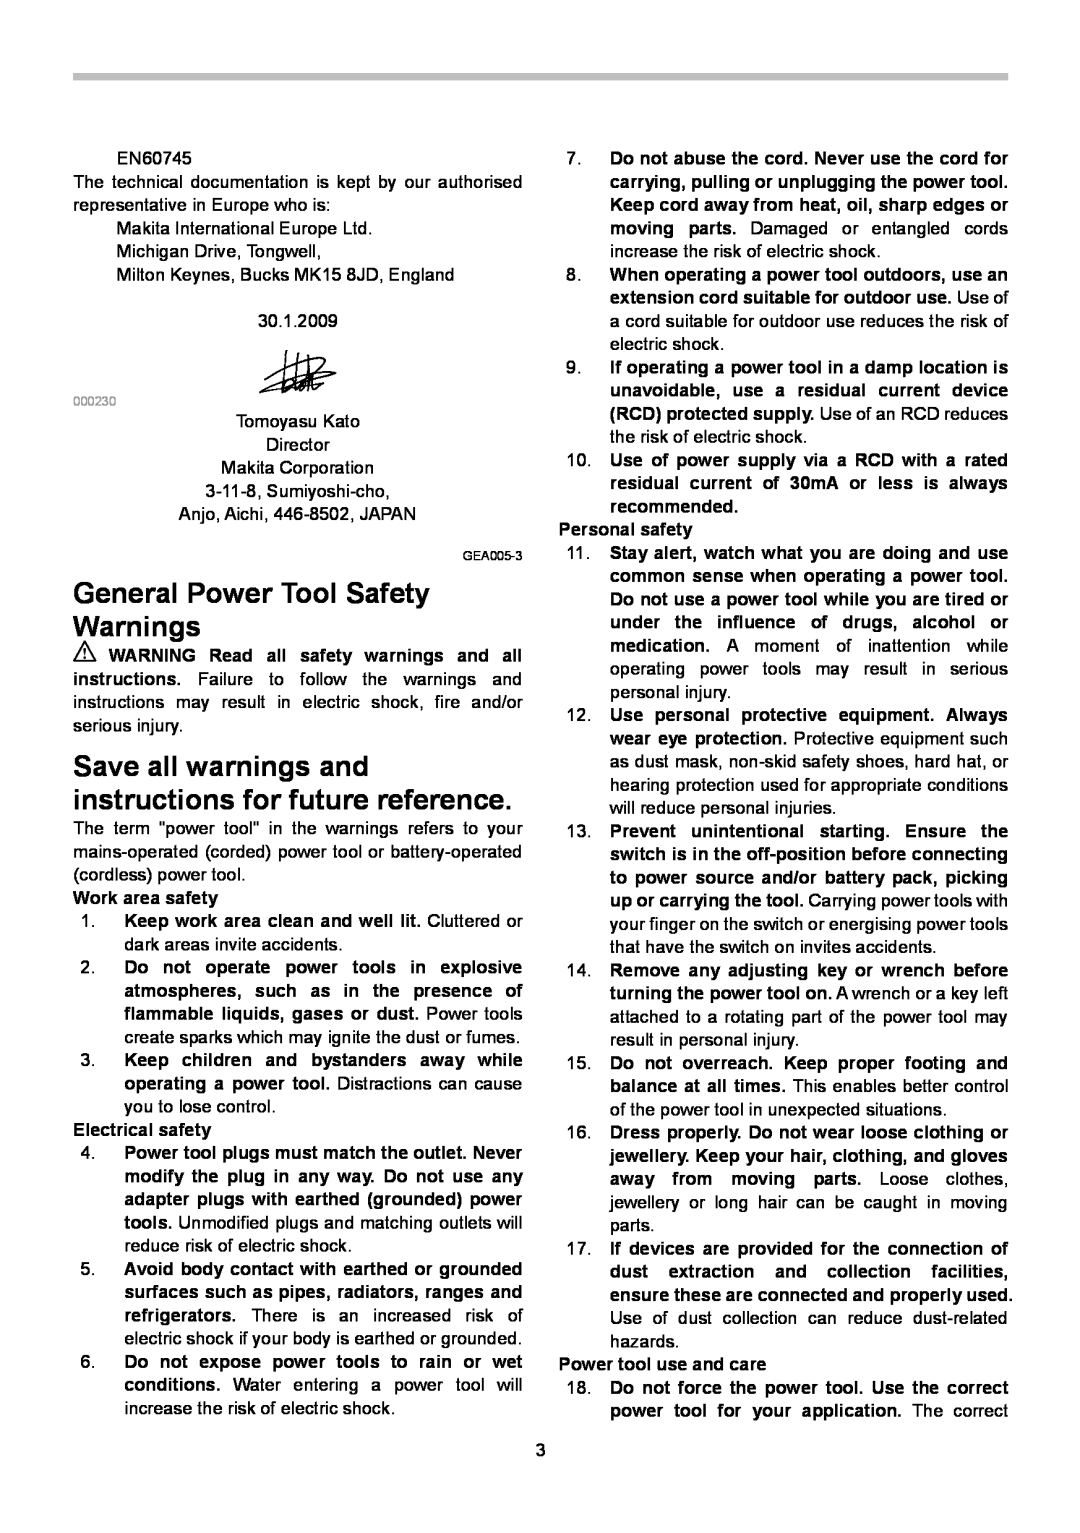 Makita HM0810T 010079 2 General Power Tool Safety Warnings, Save all warnings and instructions for future reference 